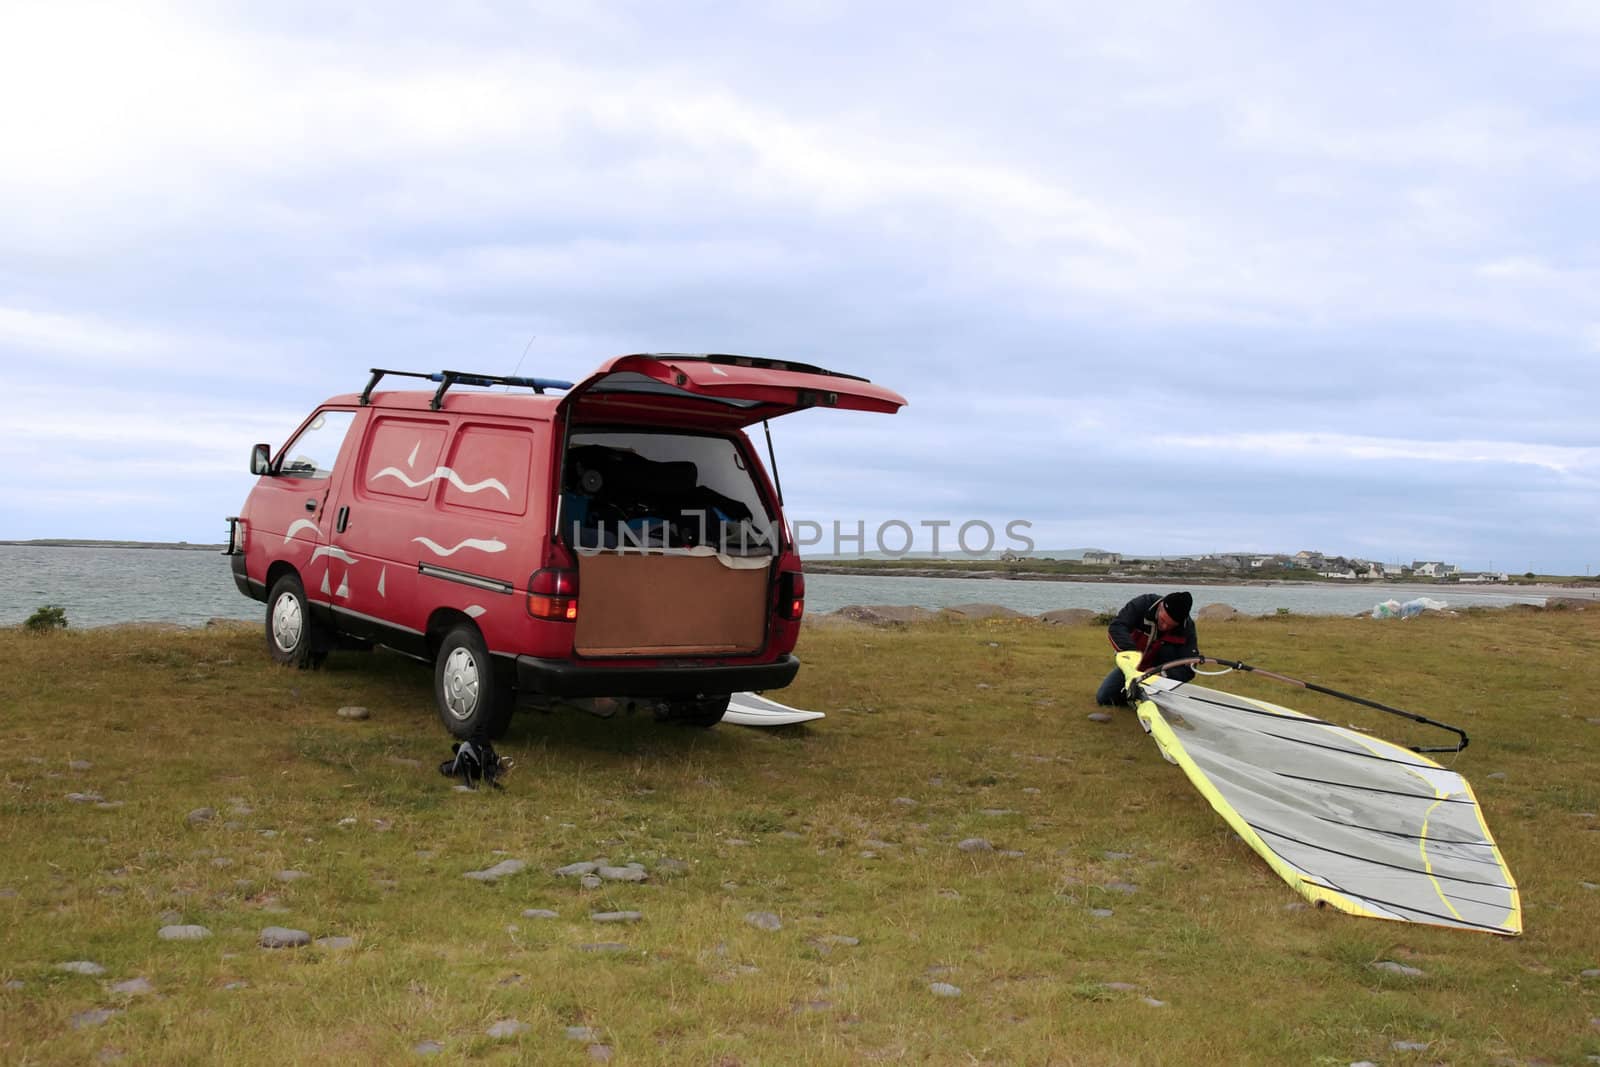 a van and windsurfer getting equipment ready on the beach in the maharees county kerry ireland